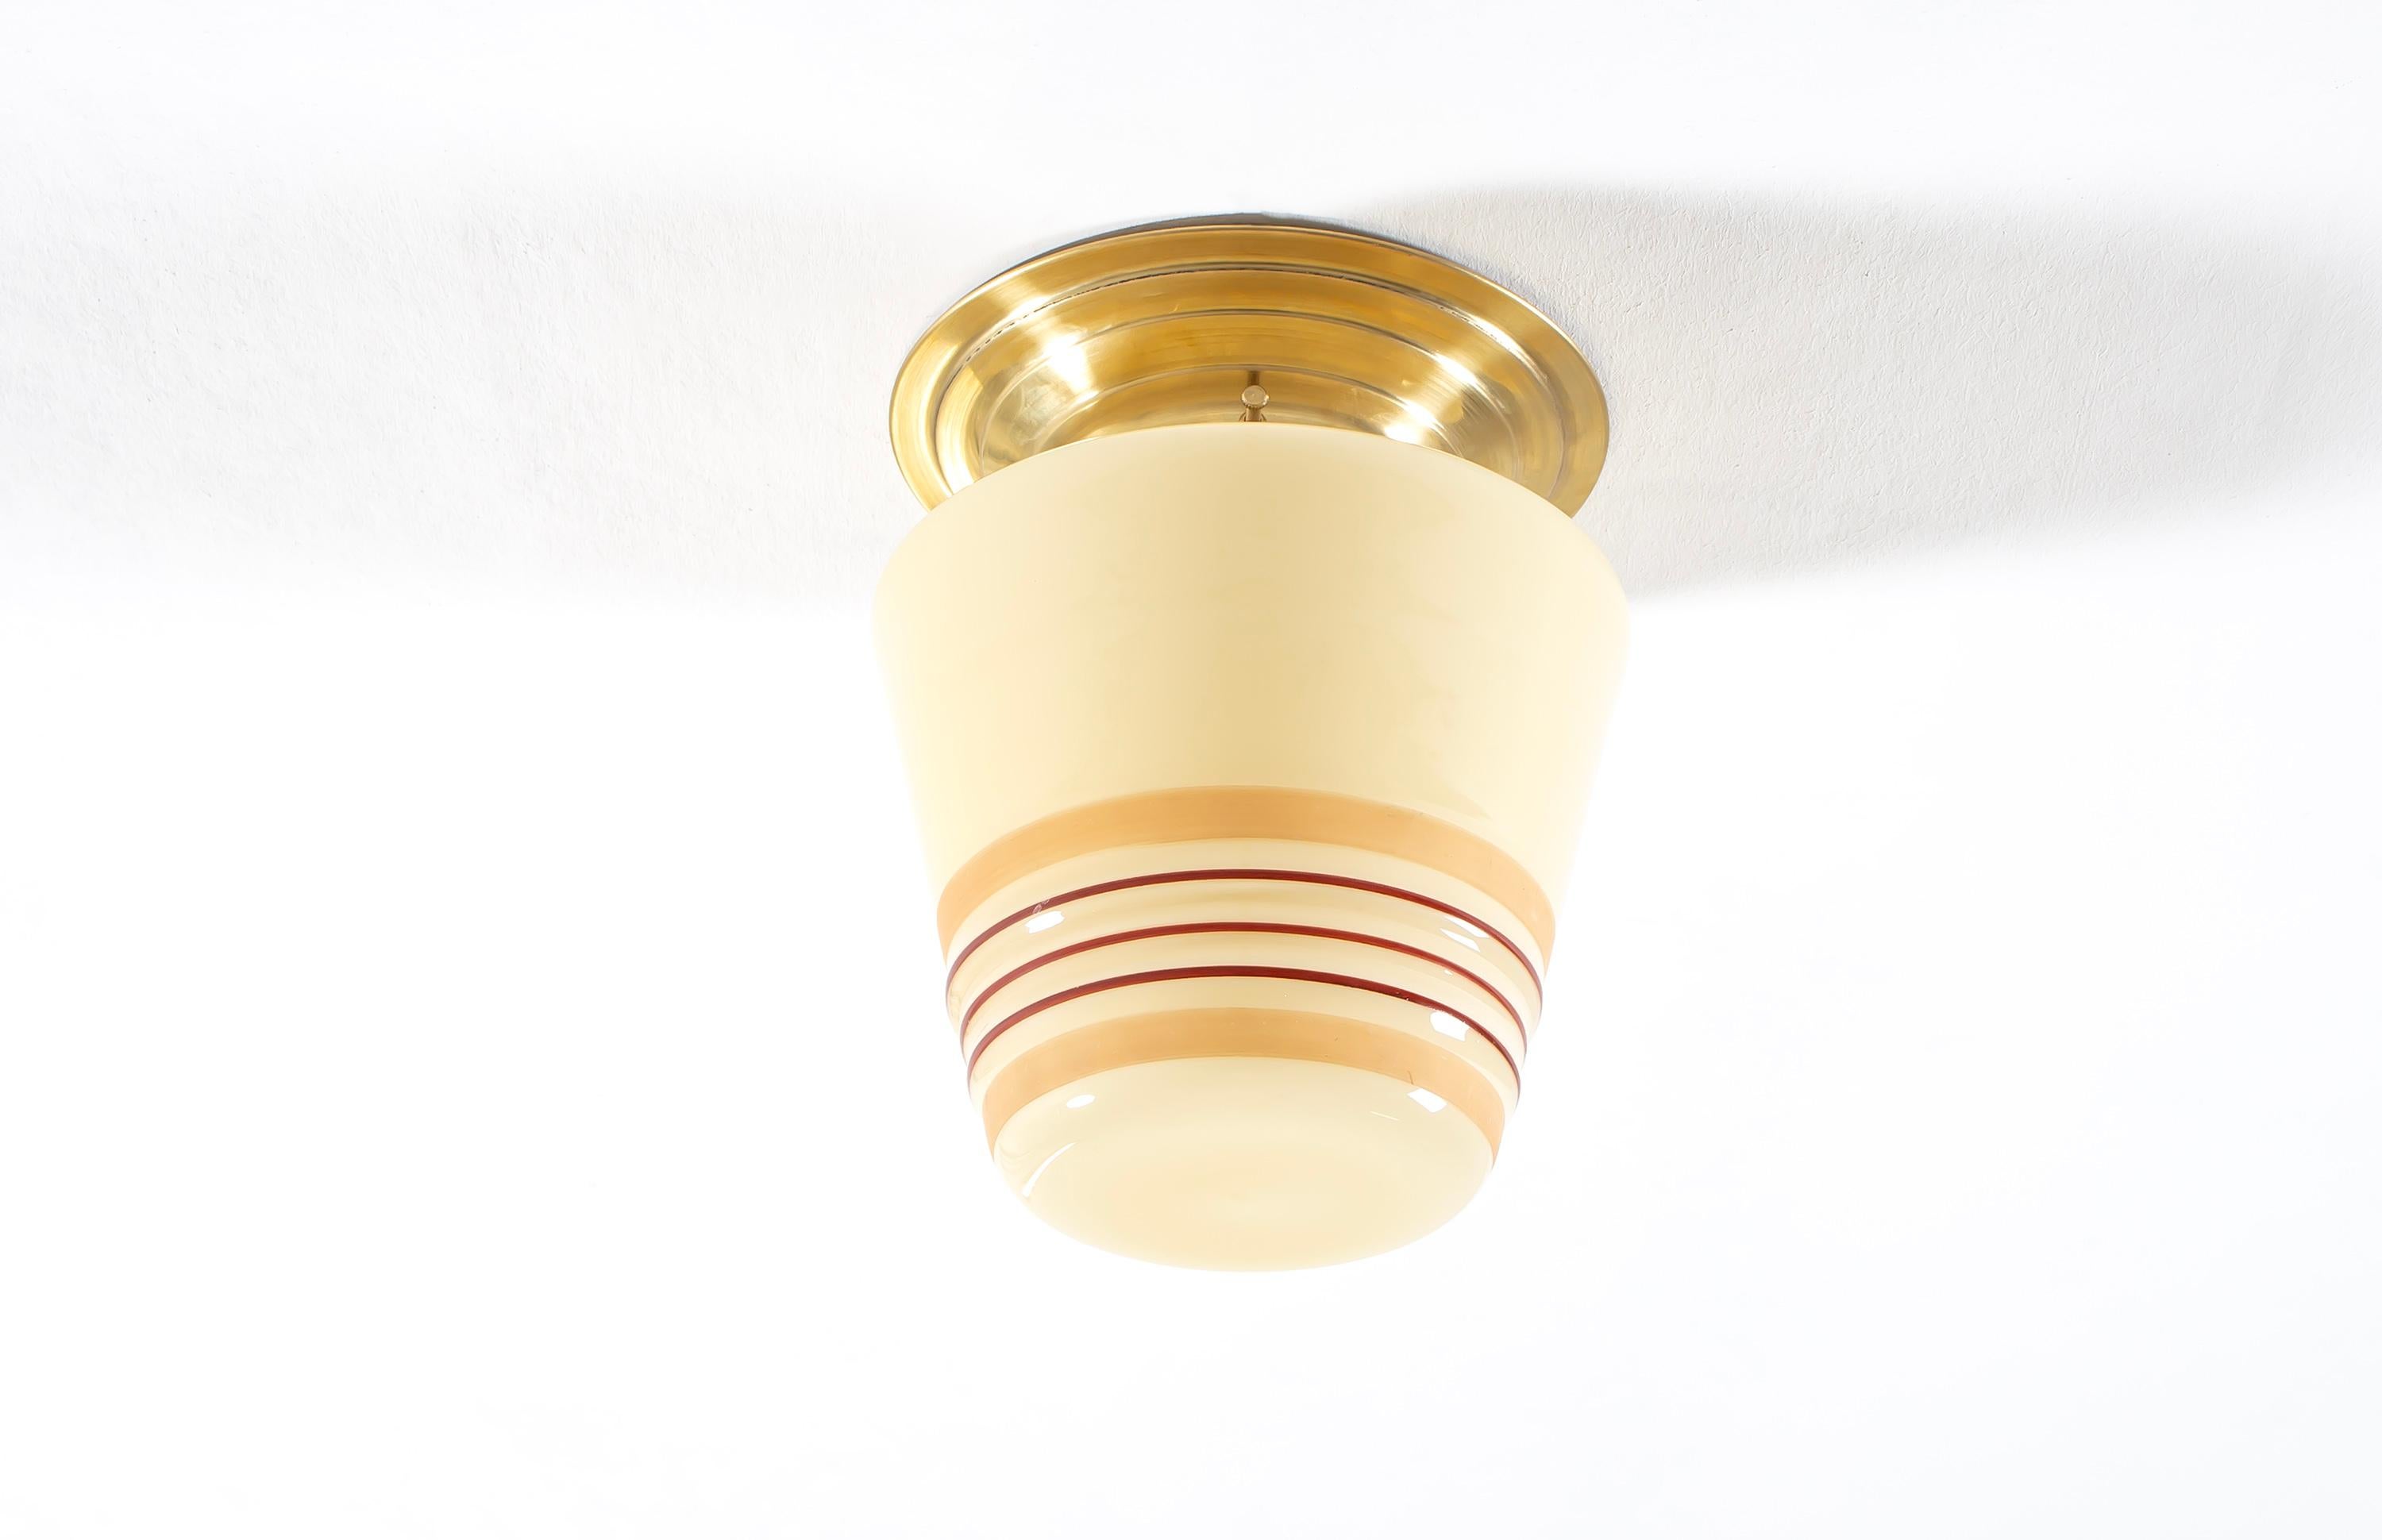 Scandinavian Flush Mount Ceiling Light, 1950s In Good Condition For Sale In Oslo, NO